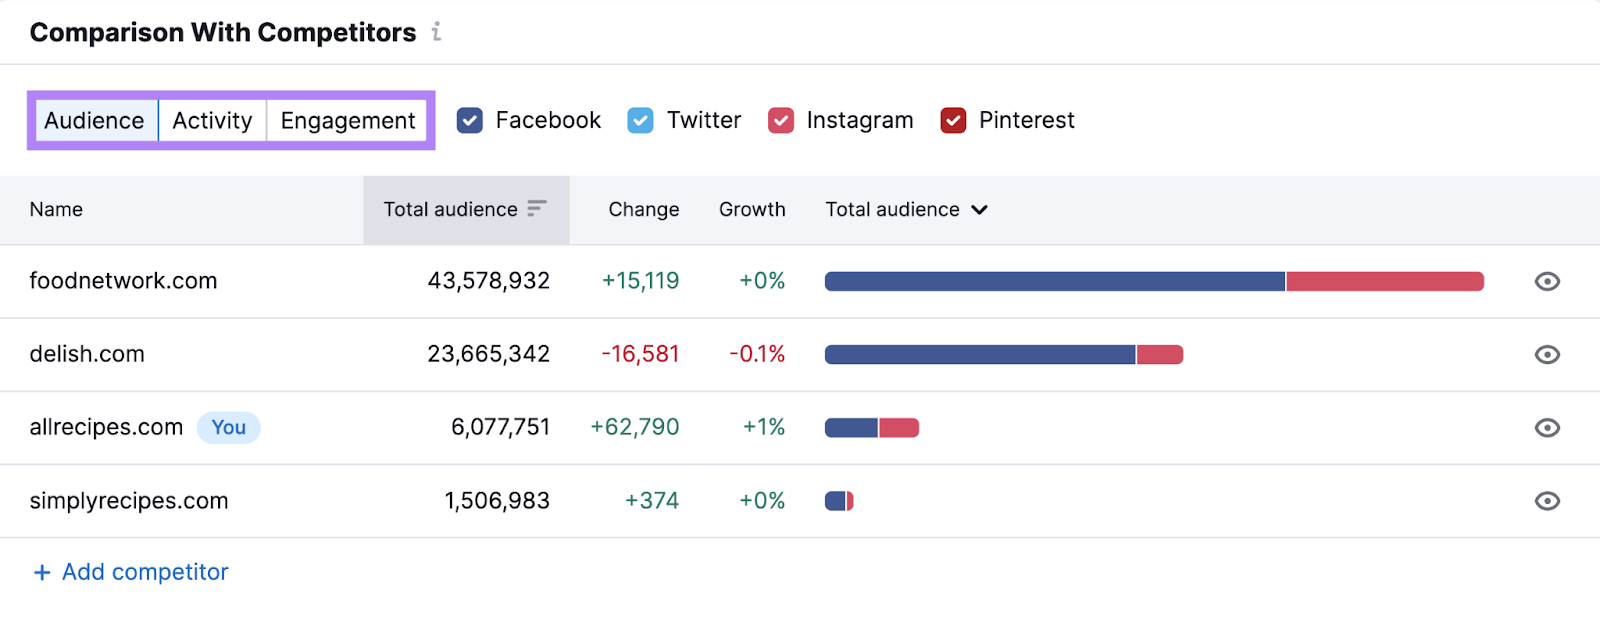 “Comparison With Competitors” module in the “Overview” tab in Social Tracker